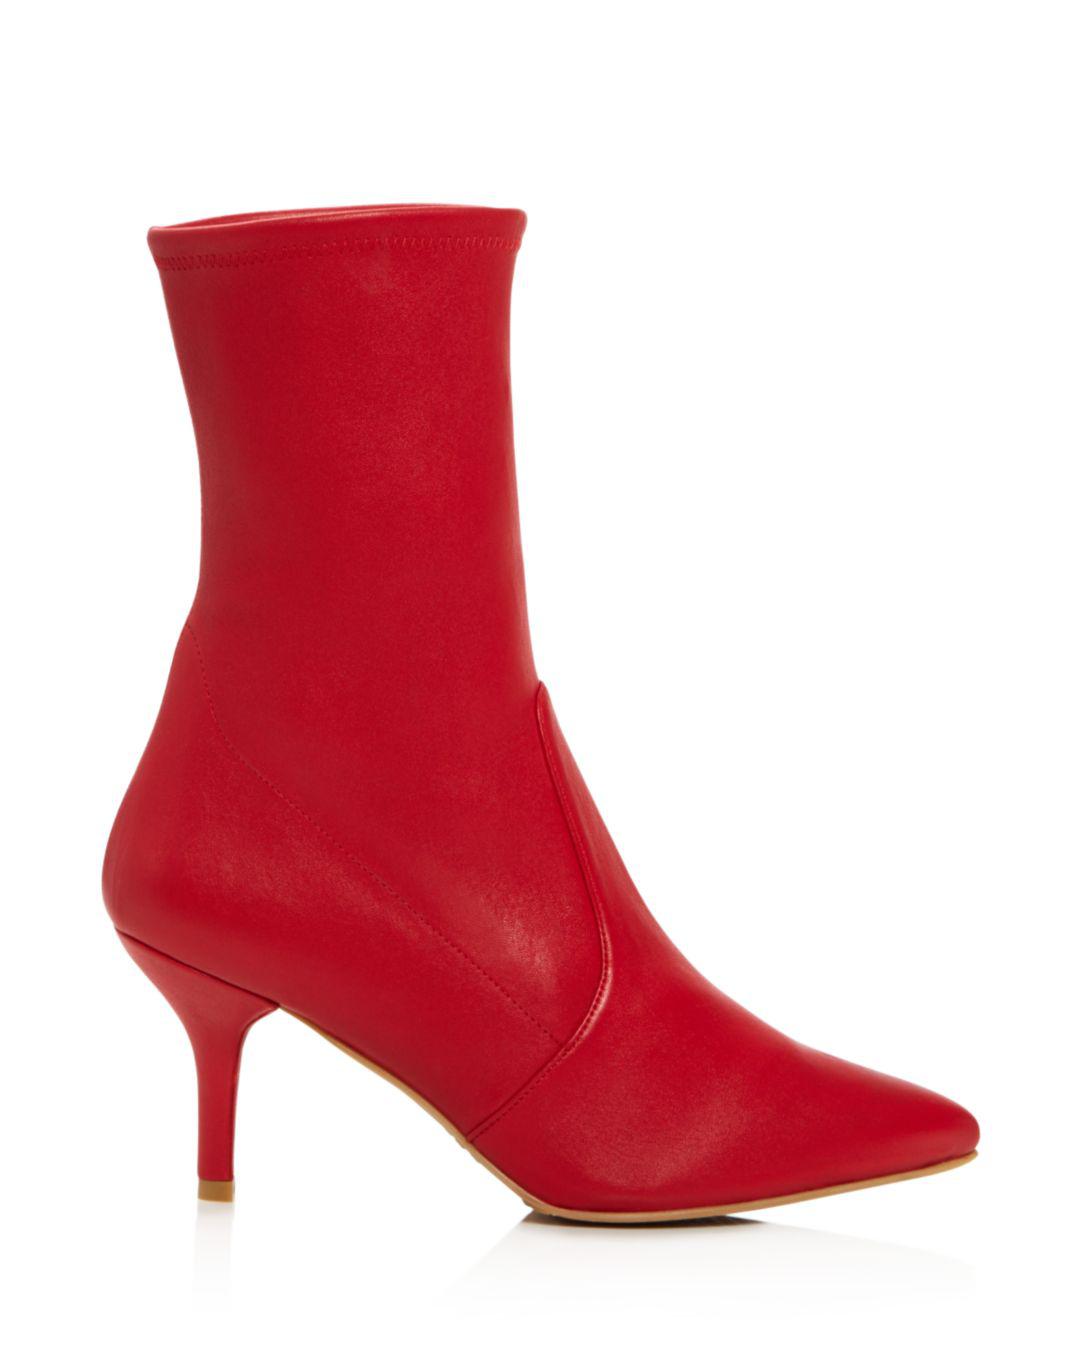 Stuart Weitzman Cling Leather Stretch Sock Booties in Red - Lyst